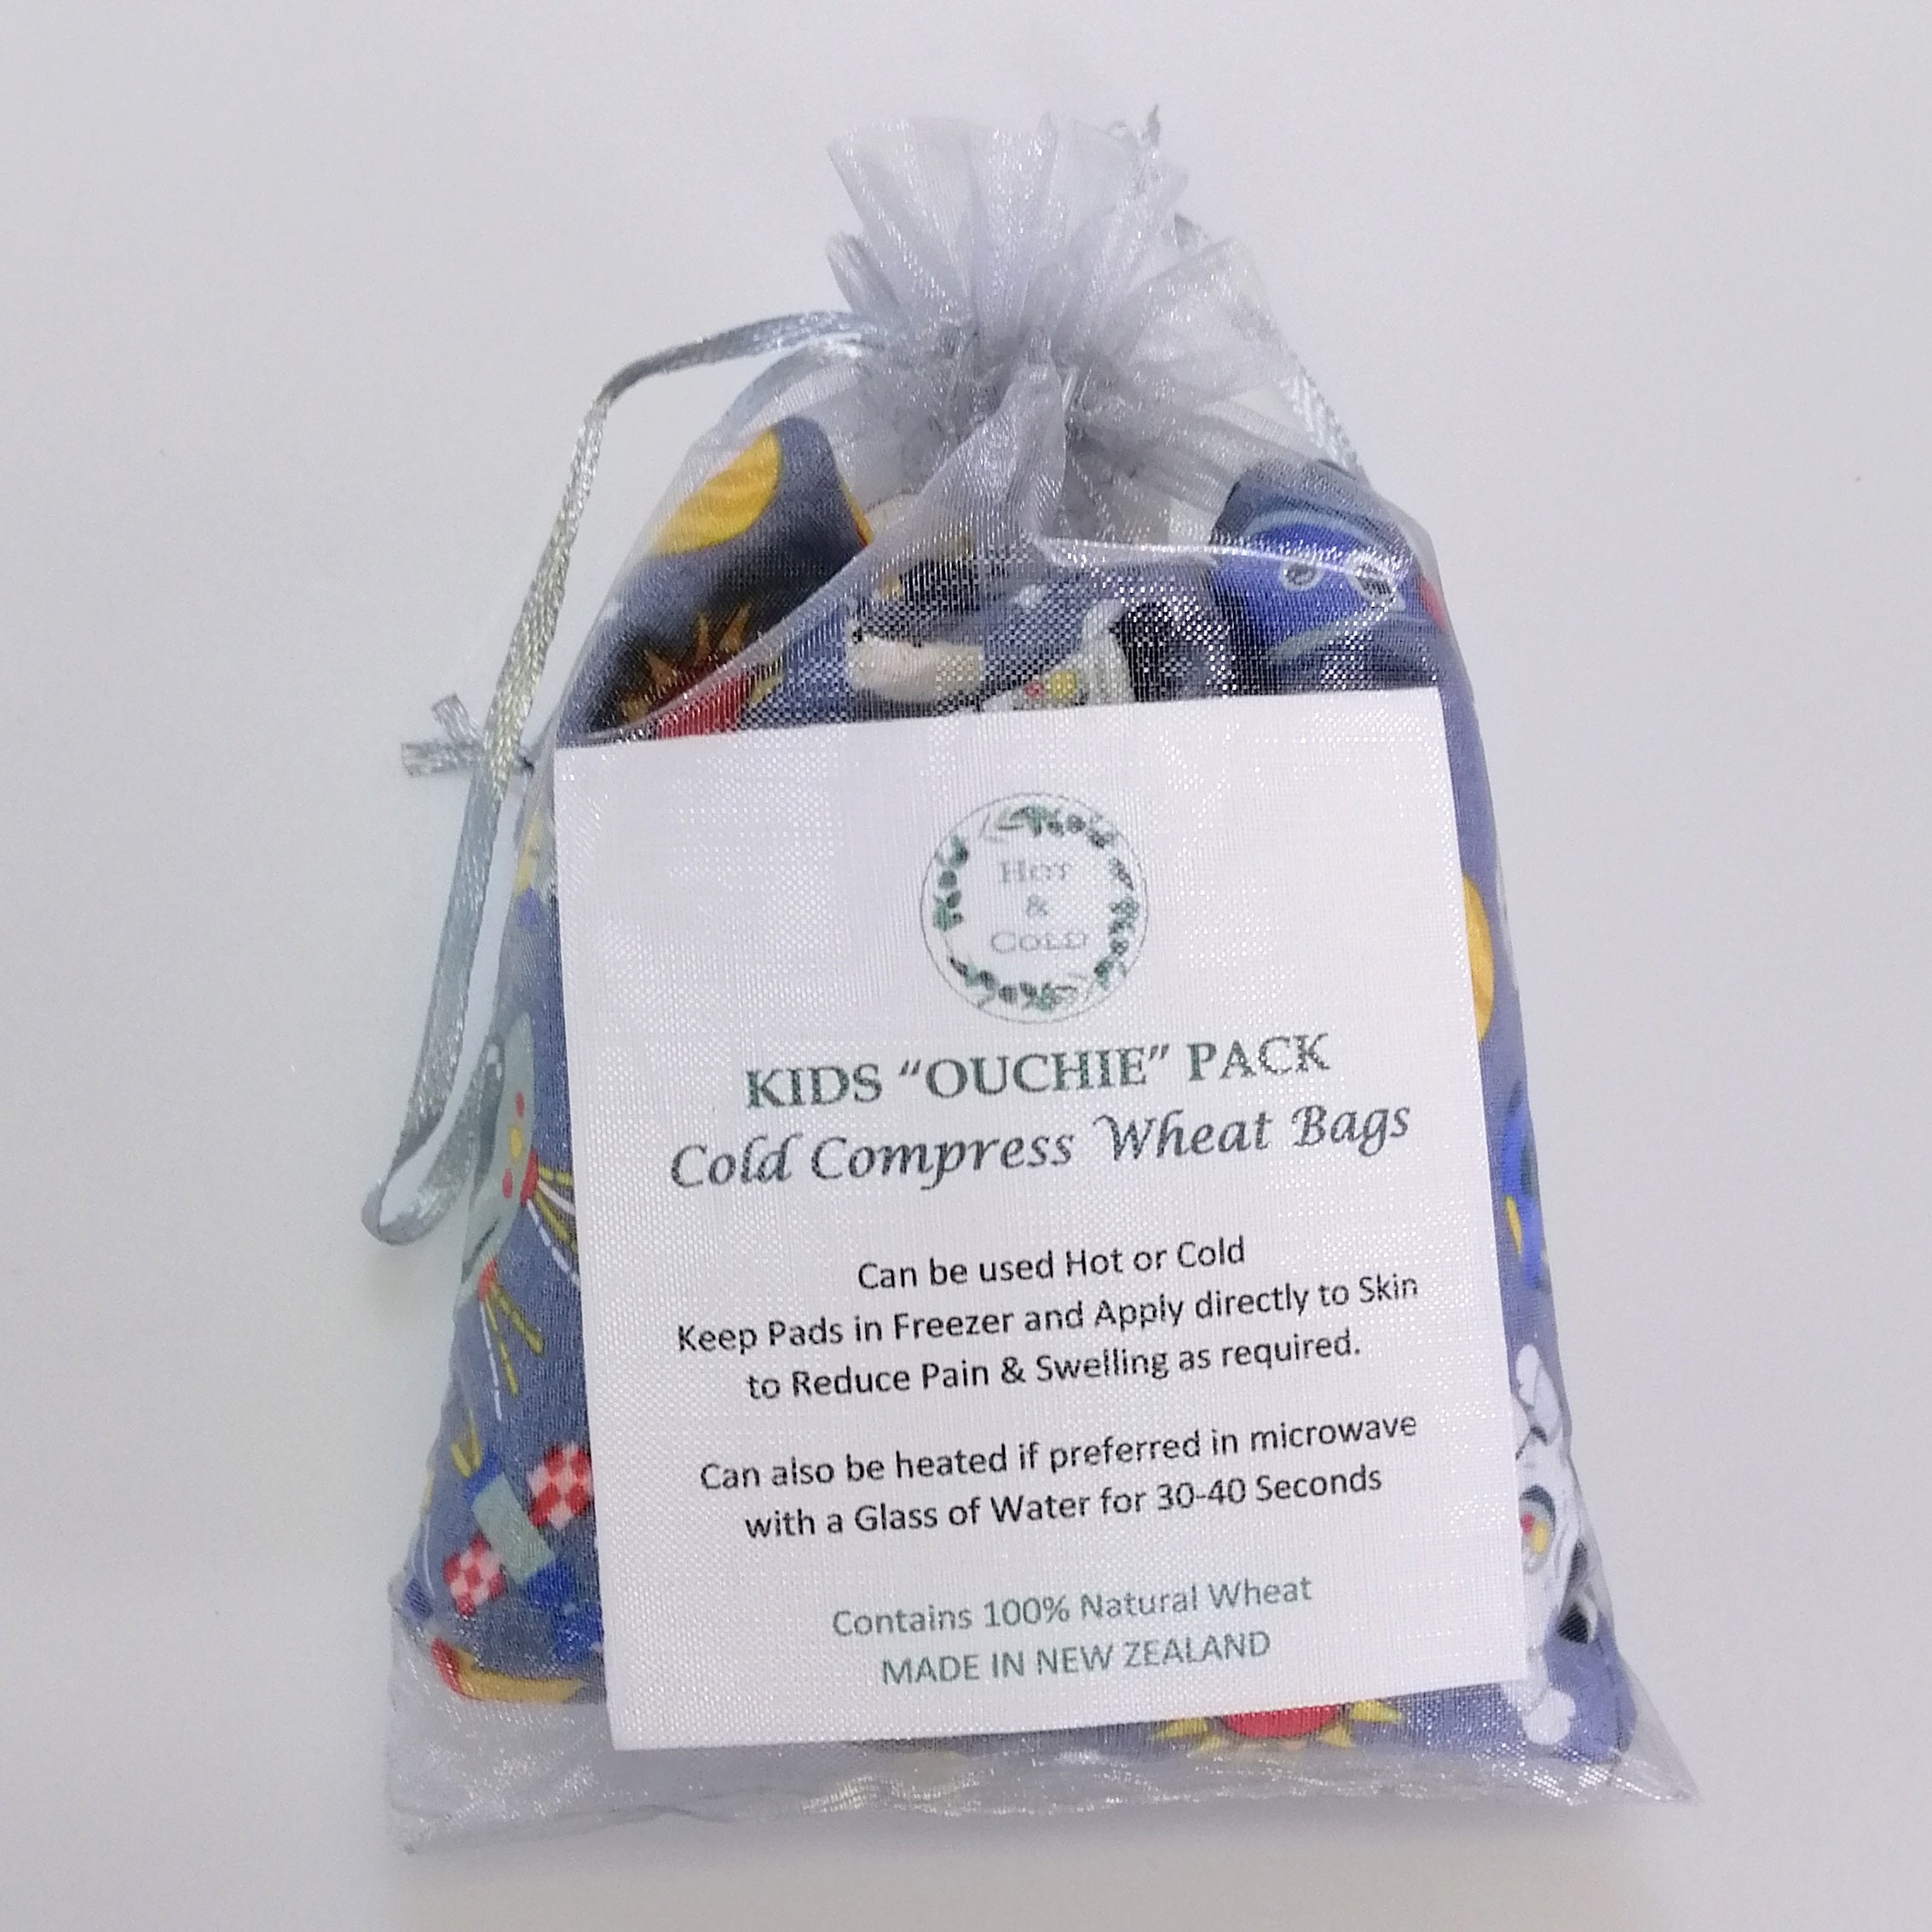 Kids 'Ouchie' Pack - Cold Compress Wheat Bag - Space